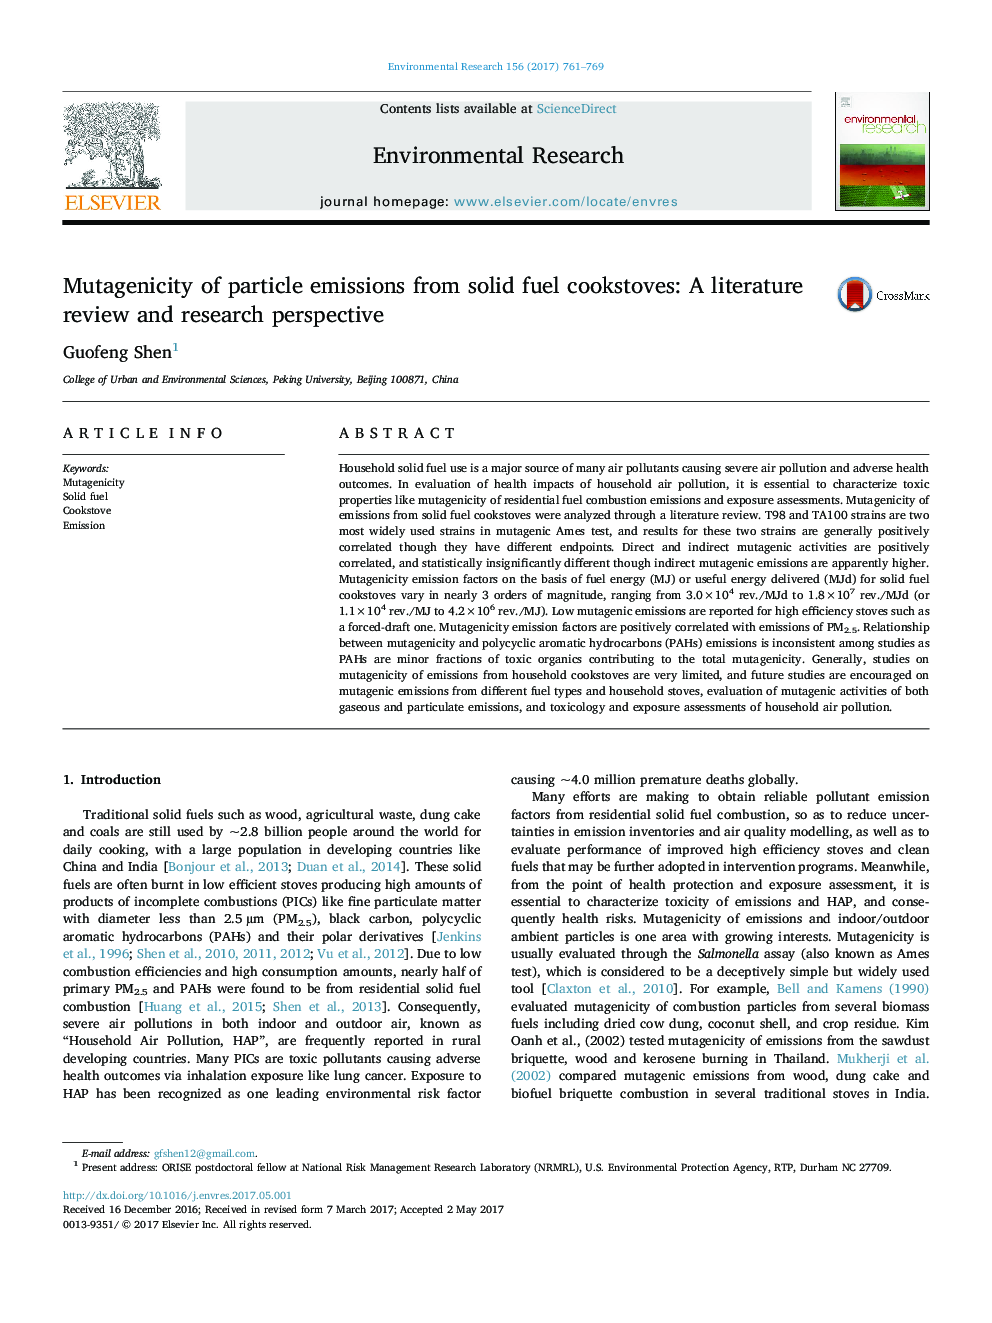 Mutagenicity of particle emissions from solid fuel cookstoves: A literature review and research perspective